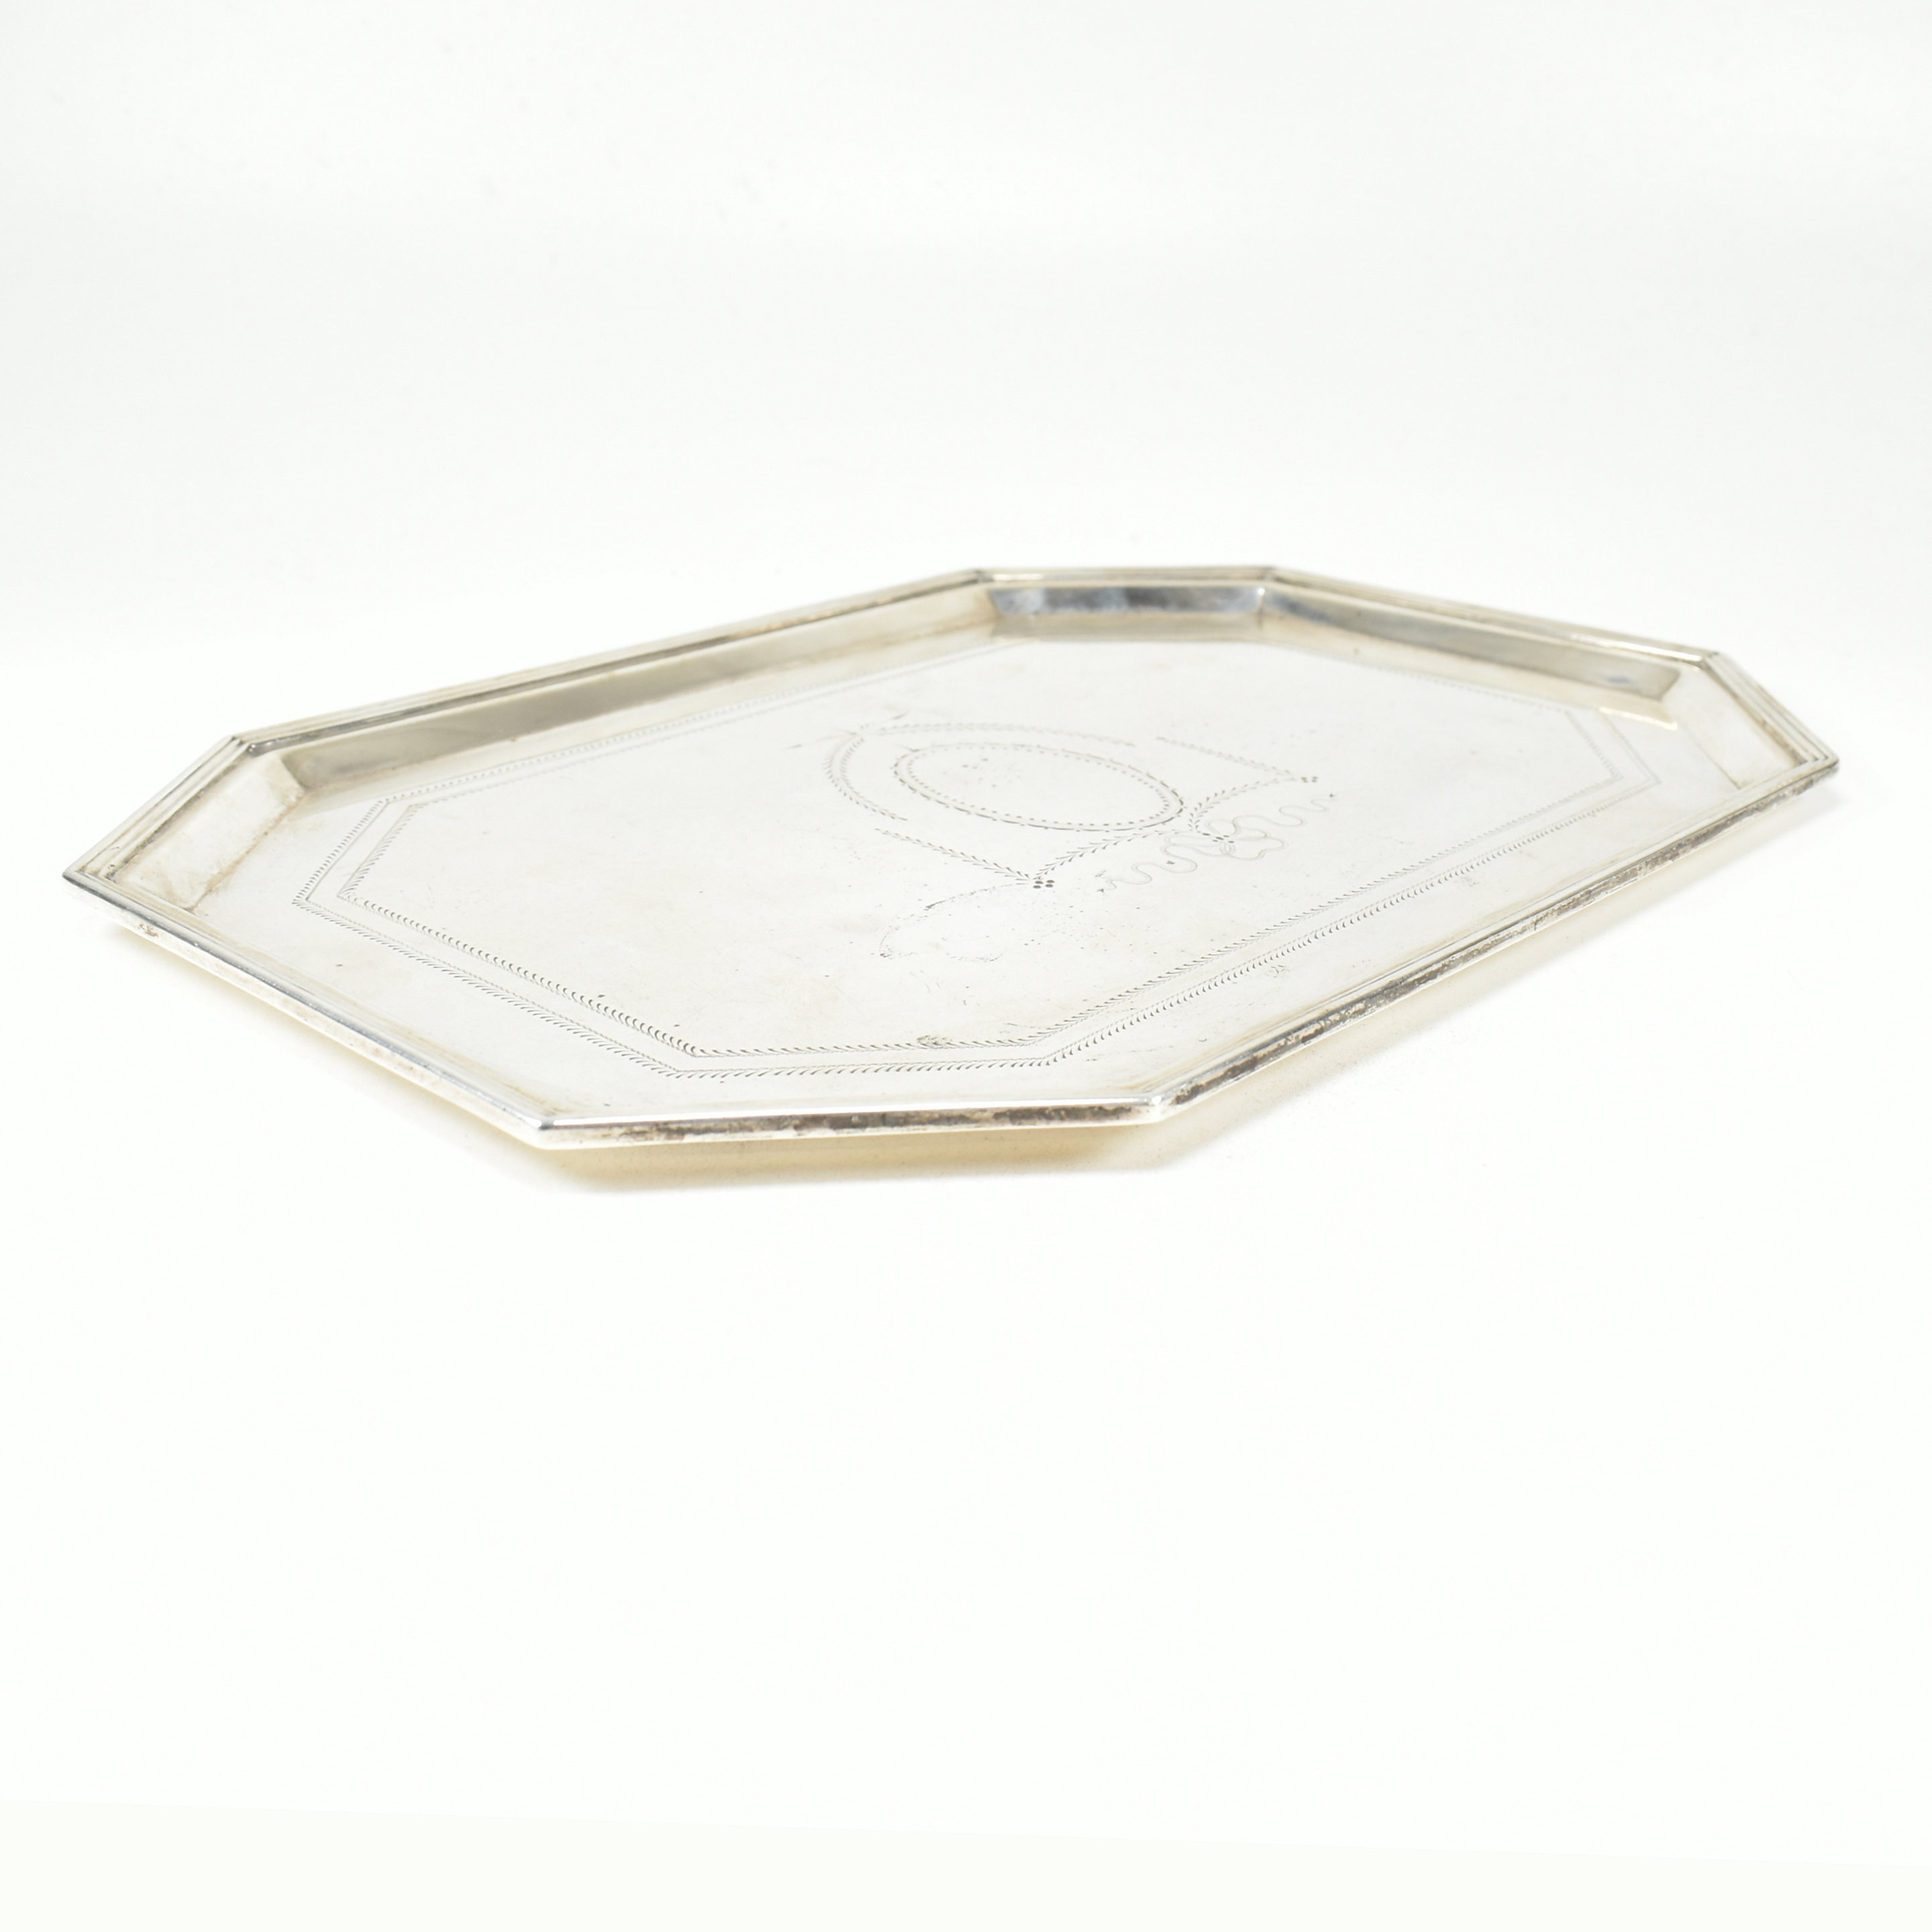 1930S HALLMARKED SILVER TRAY - Image 3 of 6